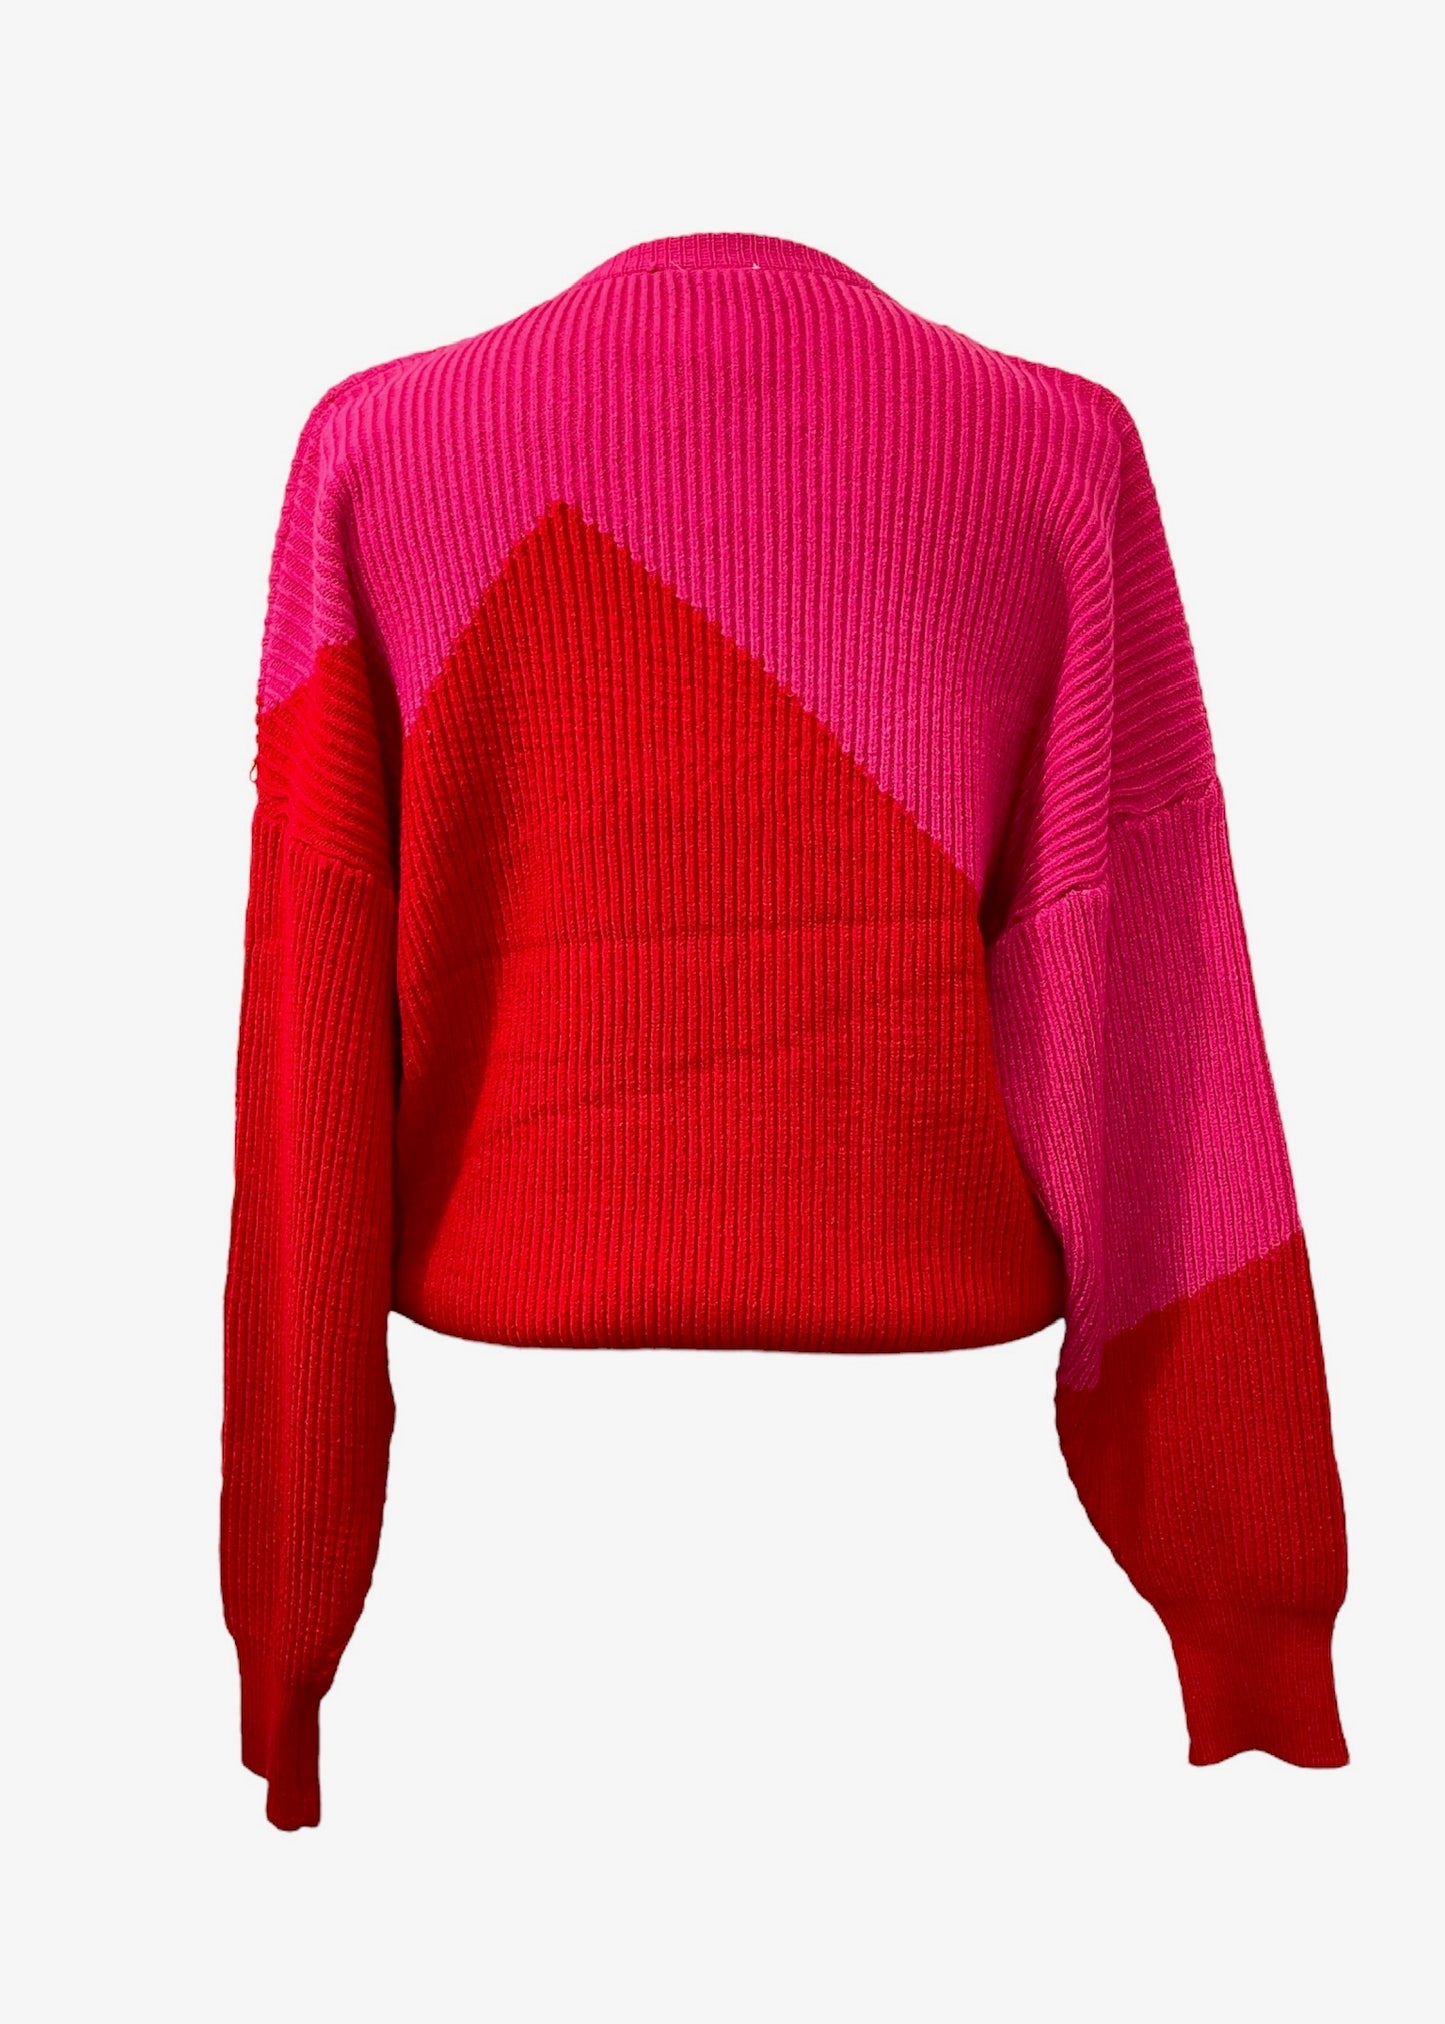 Red/Pink Sweater